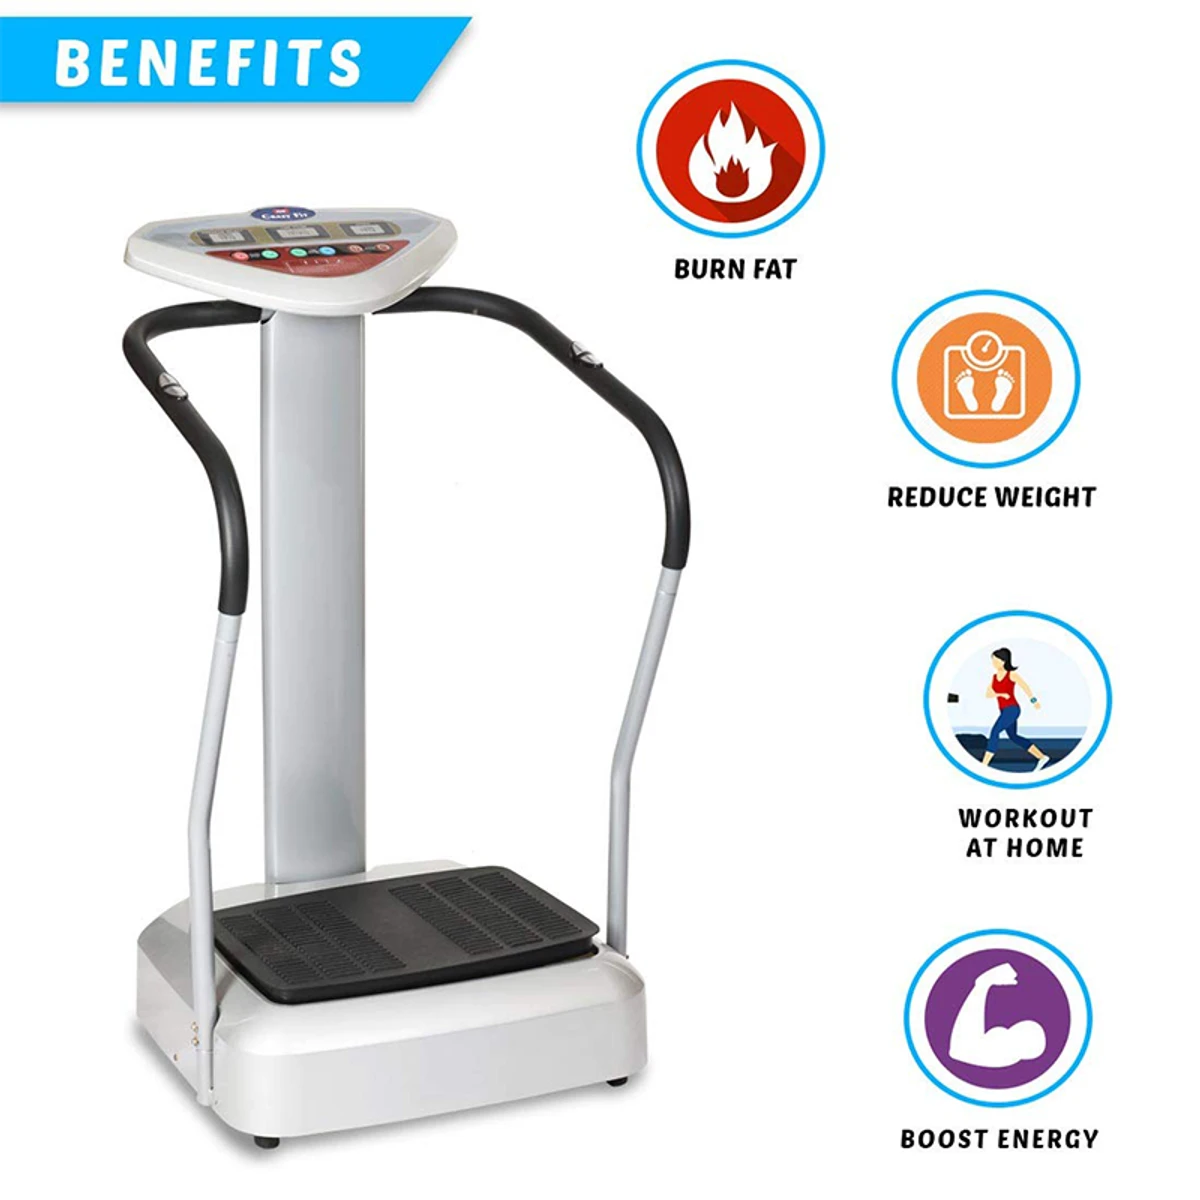 Crazy Fit Oscillation Massager Machine for Full Body Exercise Fitness Workout Vibration Plate (Fitness)